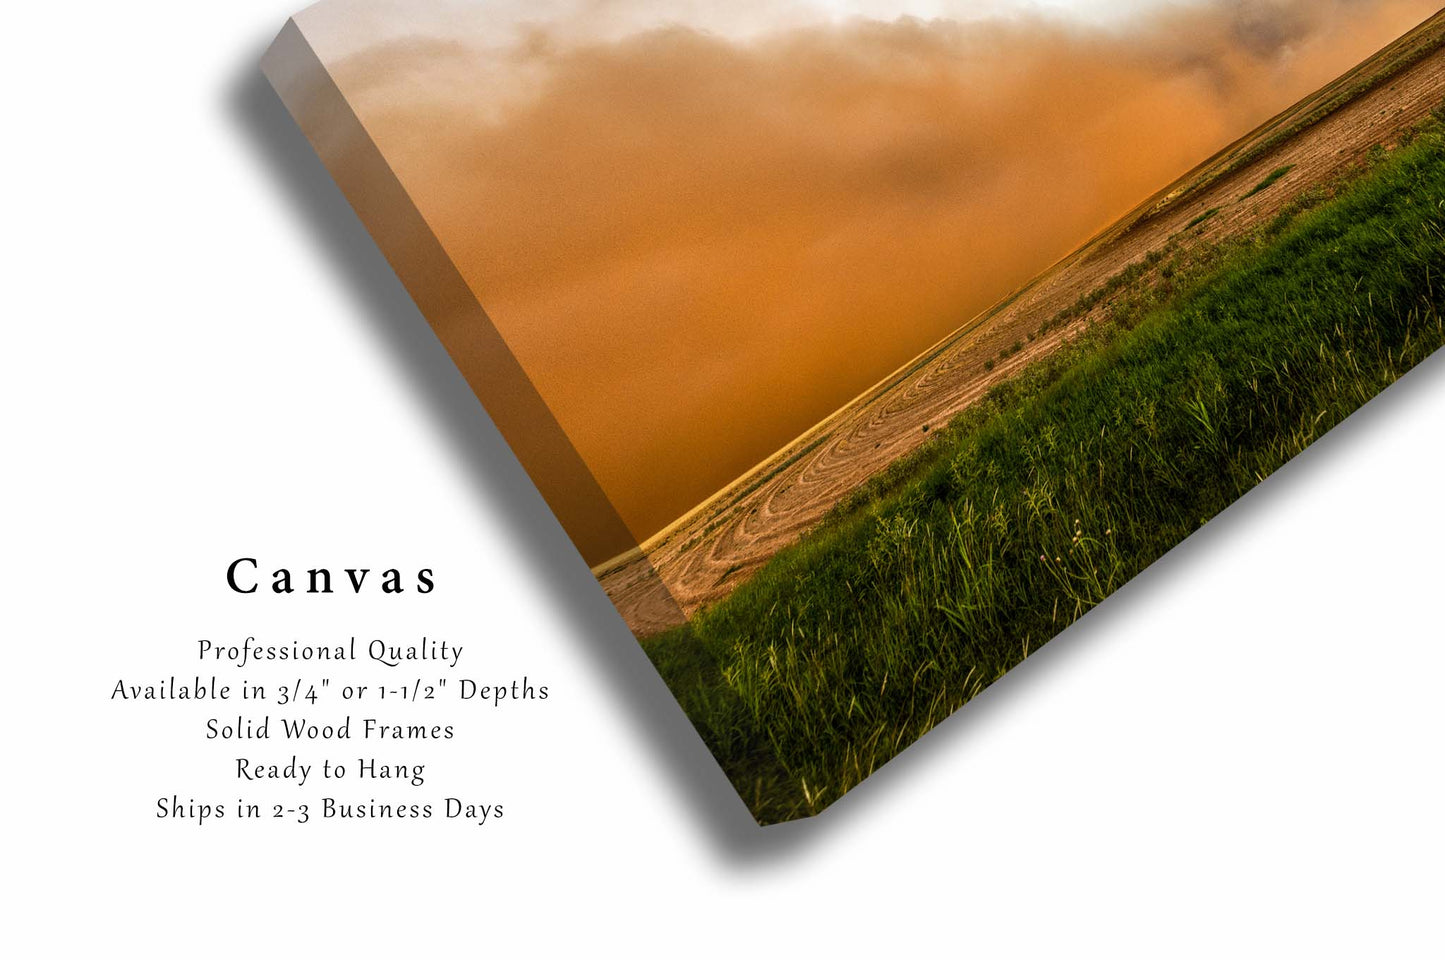 Haboob Canvas Wall Art (Ready to Hang) Gallery Wrap of Dust Storm Over Field on Stormy Spring Day in Texas Weather Photography Nature Decor